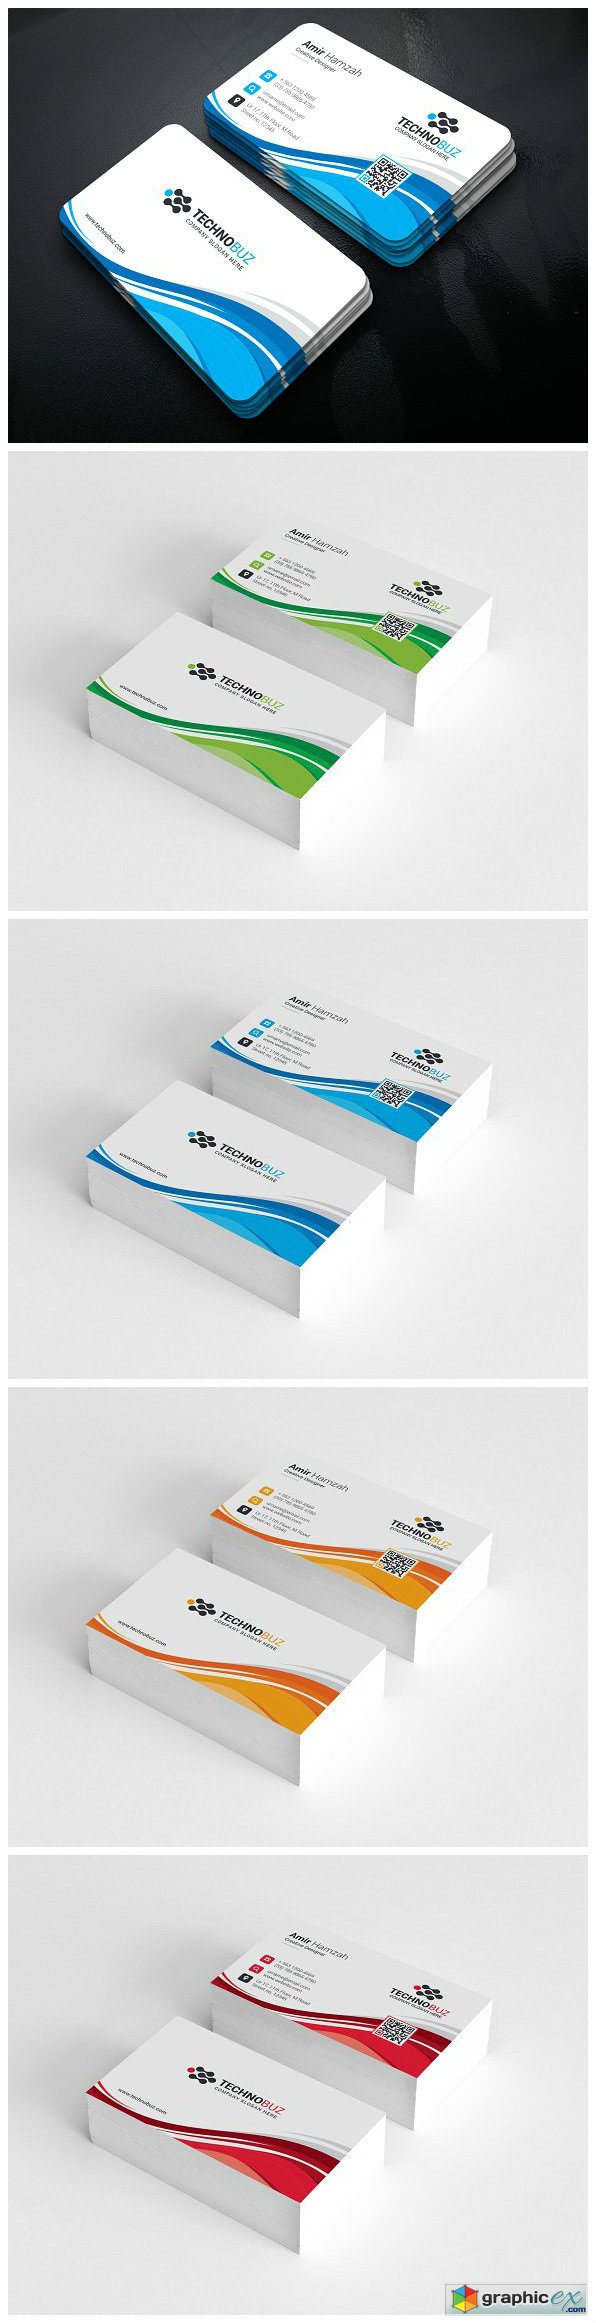 Creative Business Cards 2291887